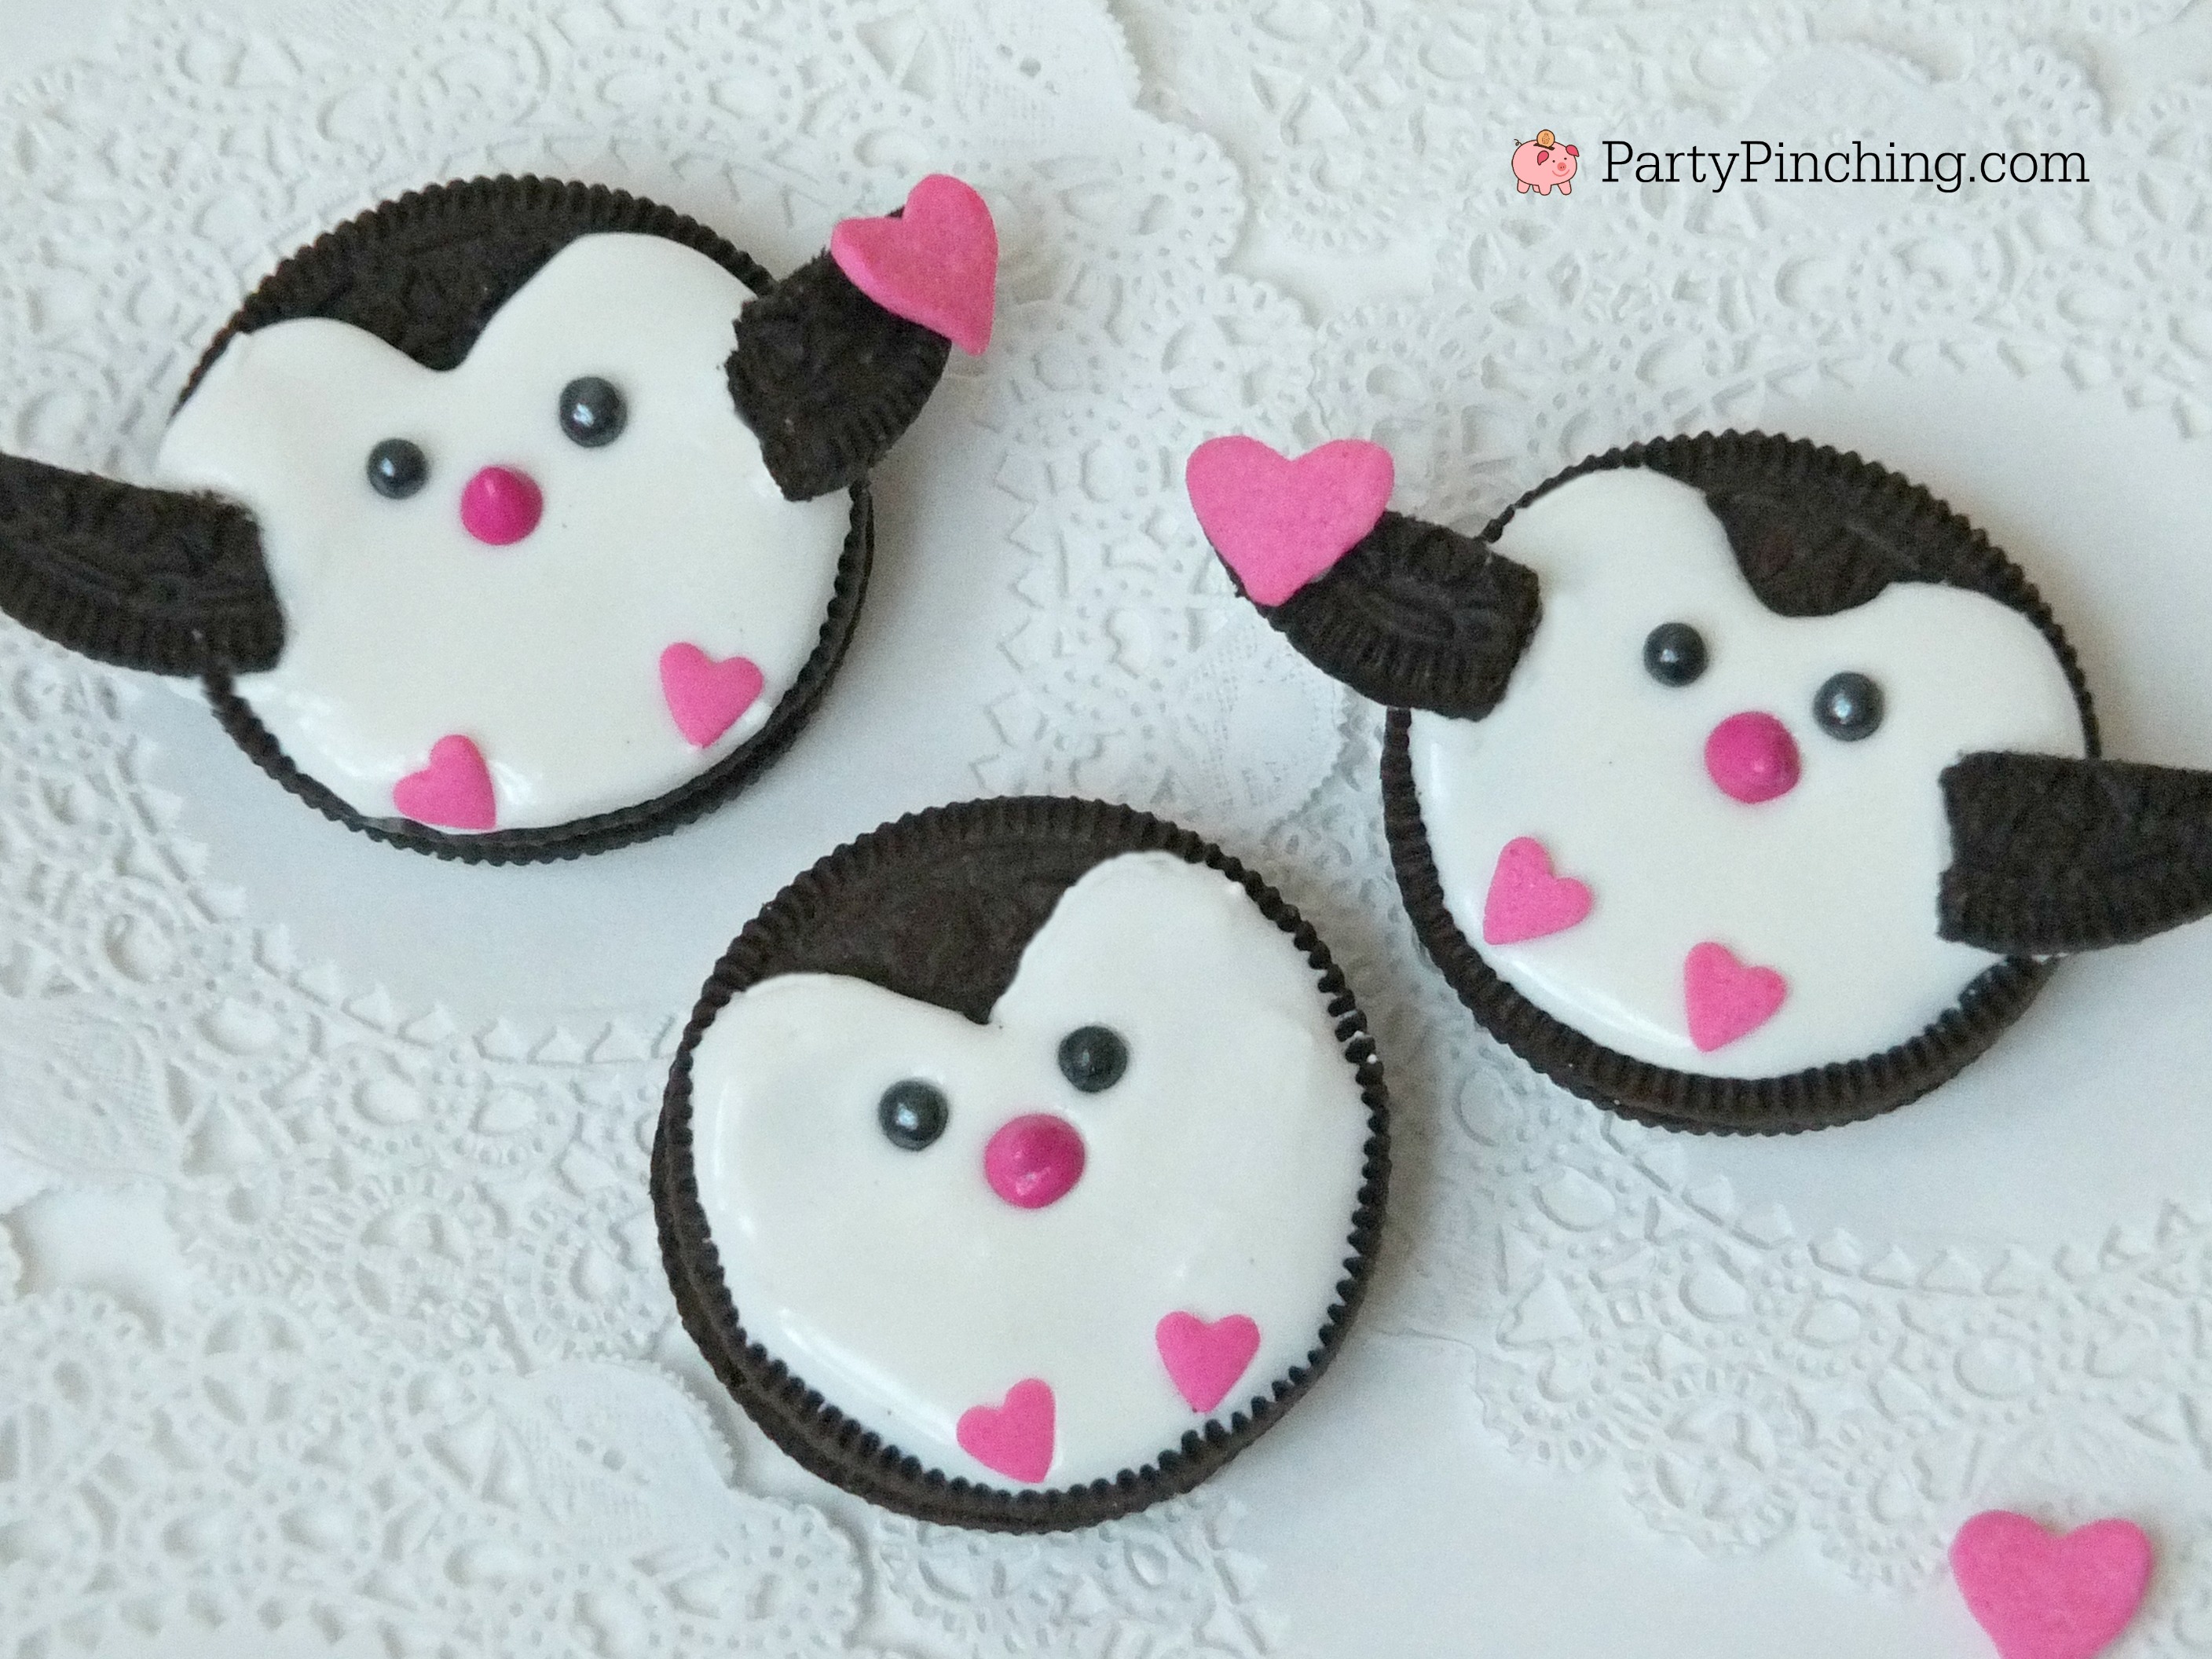 Penguin Oreo Cookies, cute Valentine's Day cookies, Oreo Penguin cookies, easy Valentine cookie ideas for kids, sweet treats for Valentine's day party class party food, fun food penguins